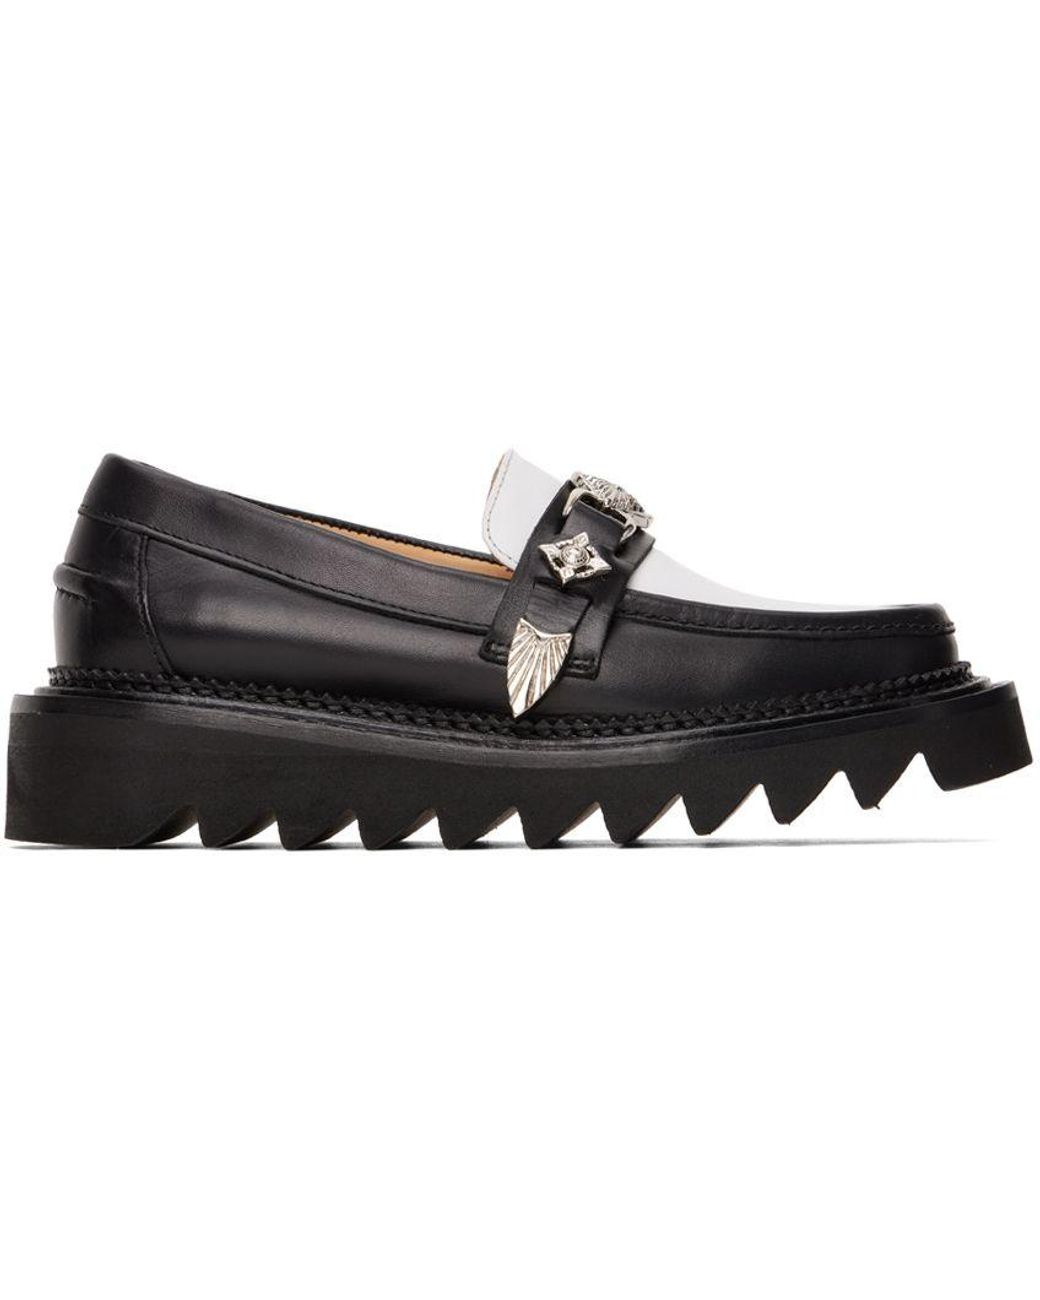 Toga Black Leather Loafers | Lyst